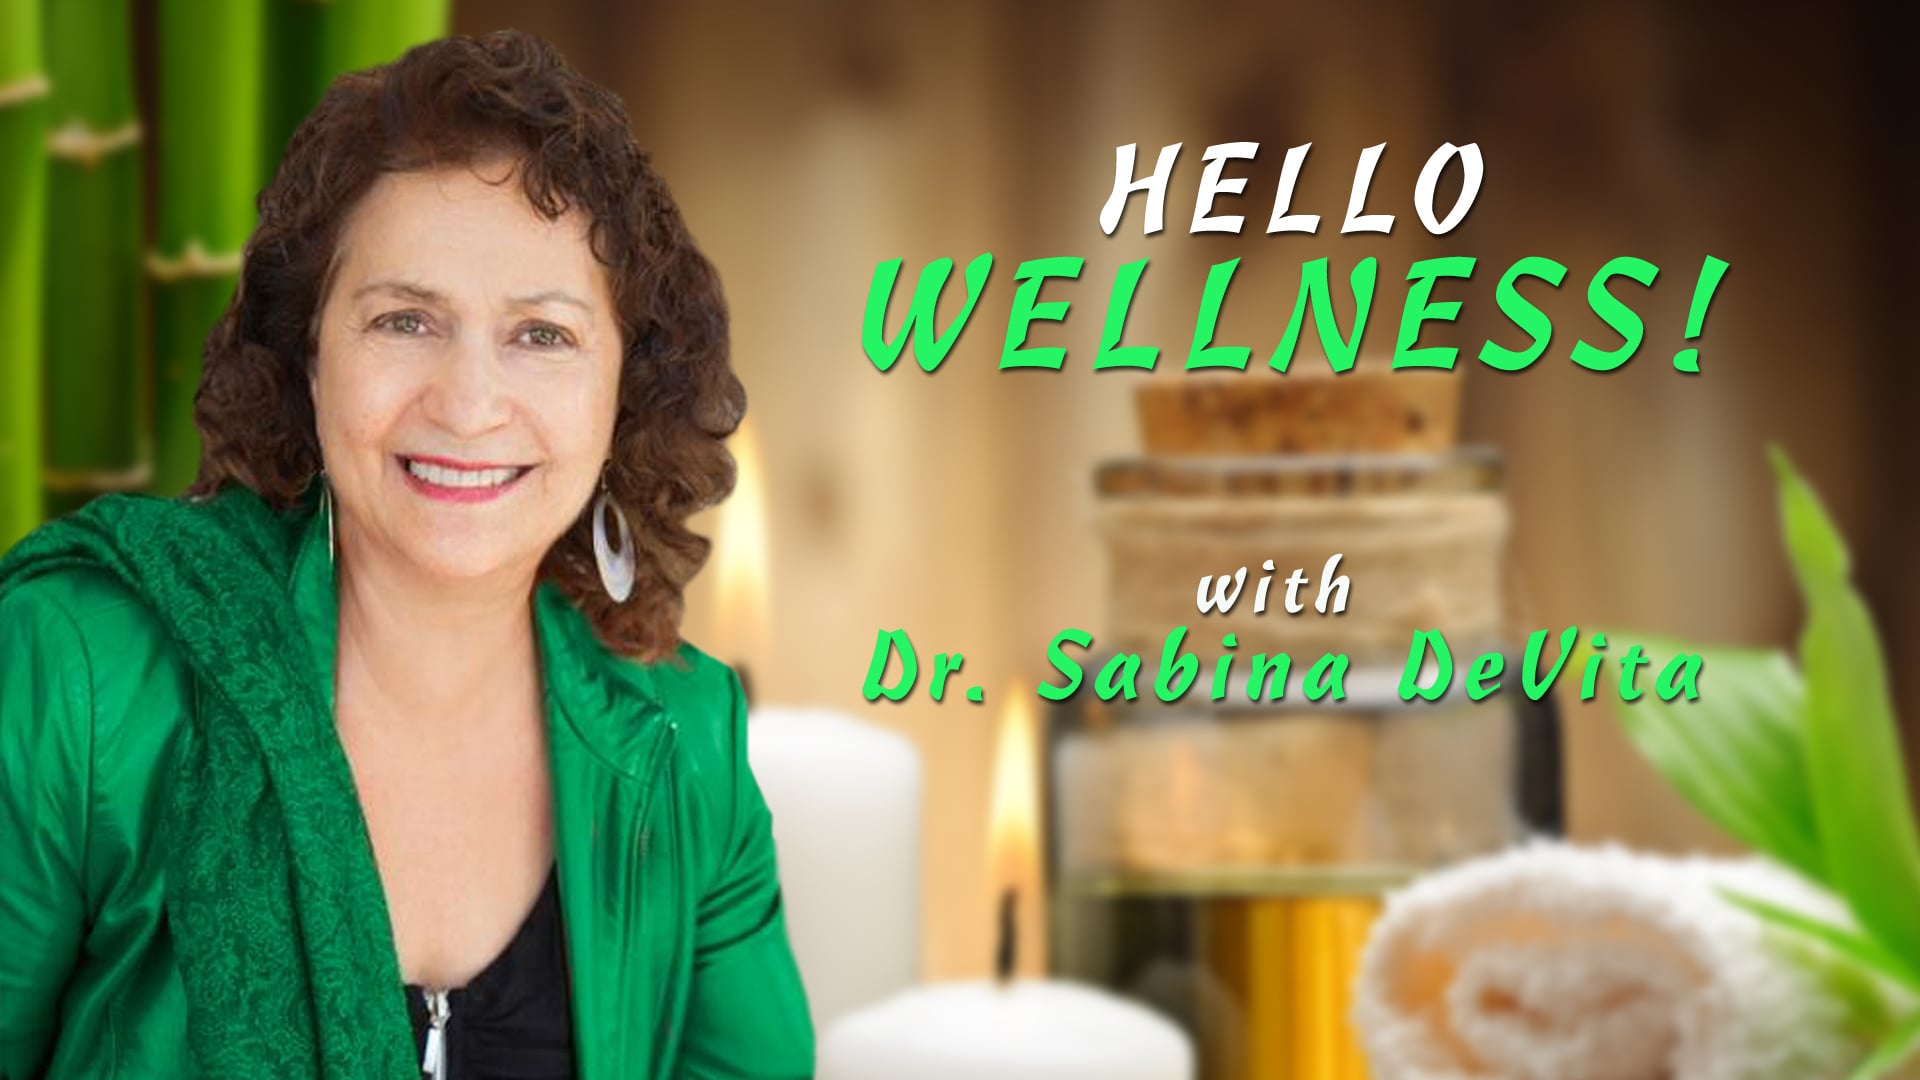 Hello Wellness! Seat of the Soul.